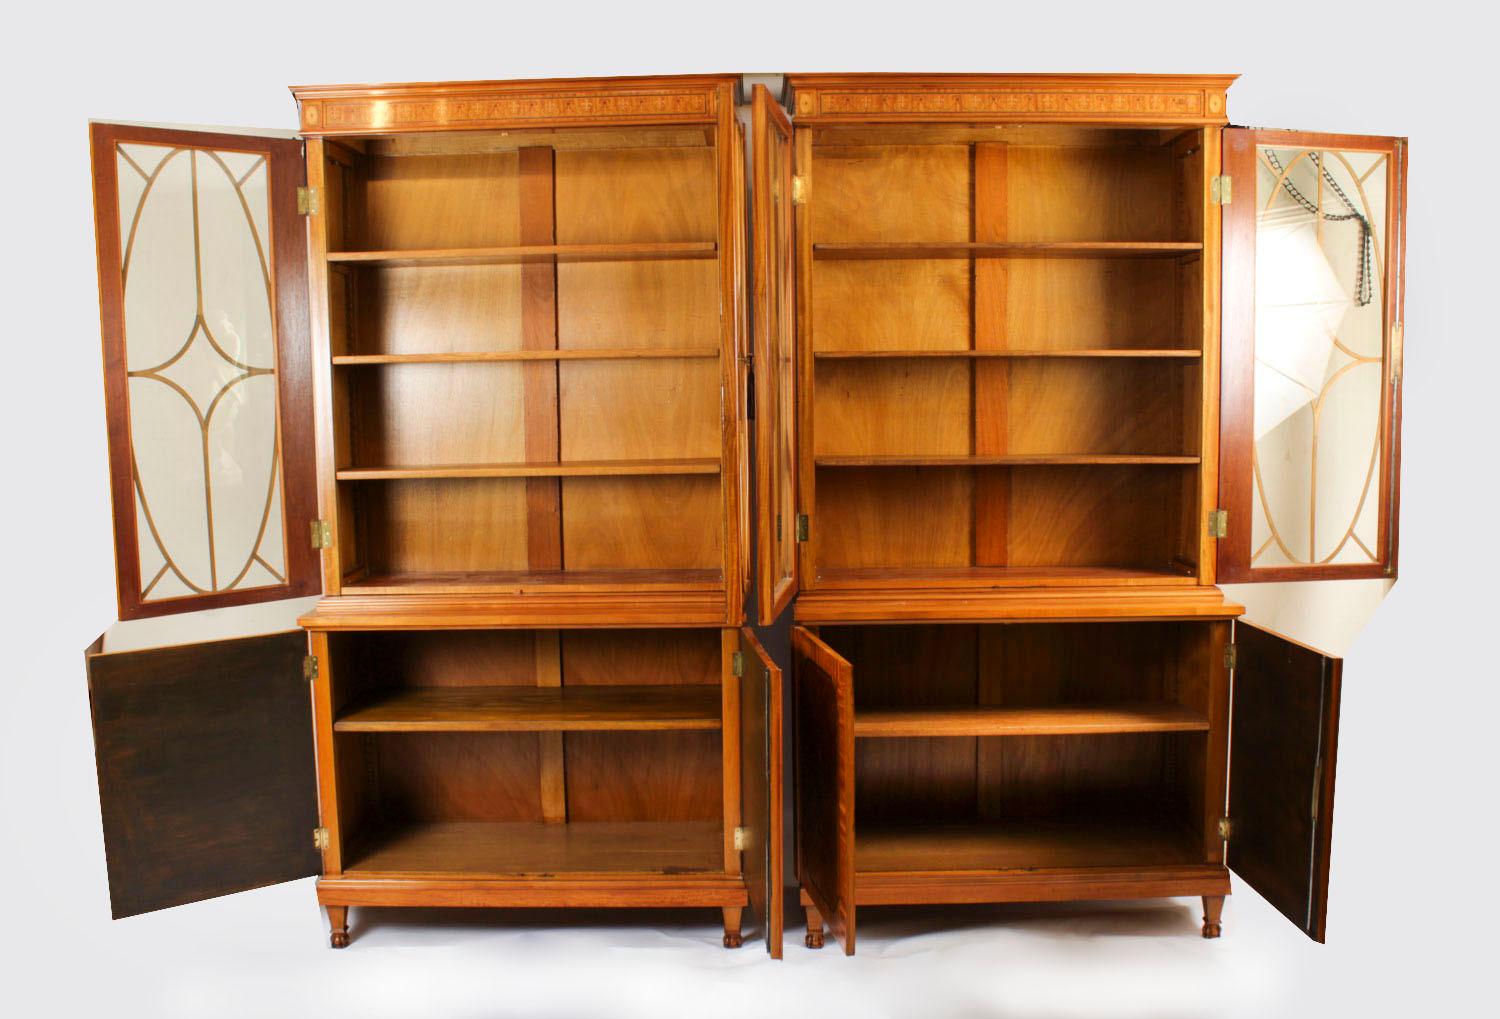 Antique Pair Edwardian Inlaid Satinwood Bookcases by Maple & Co Early 20th C For Sale 7